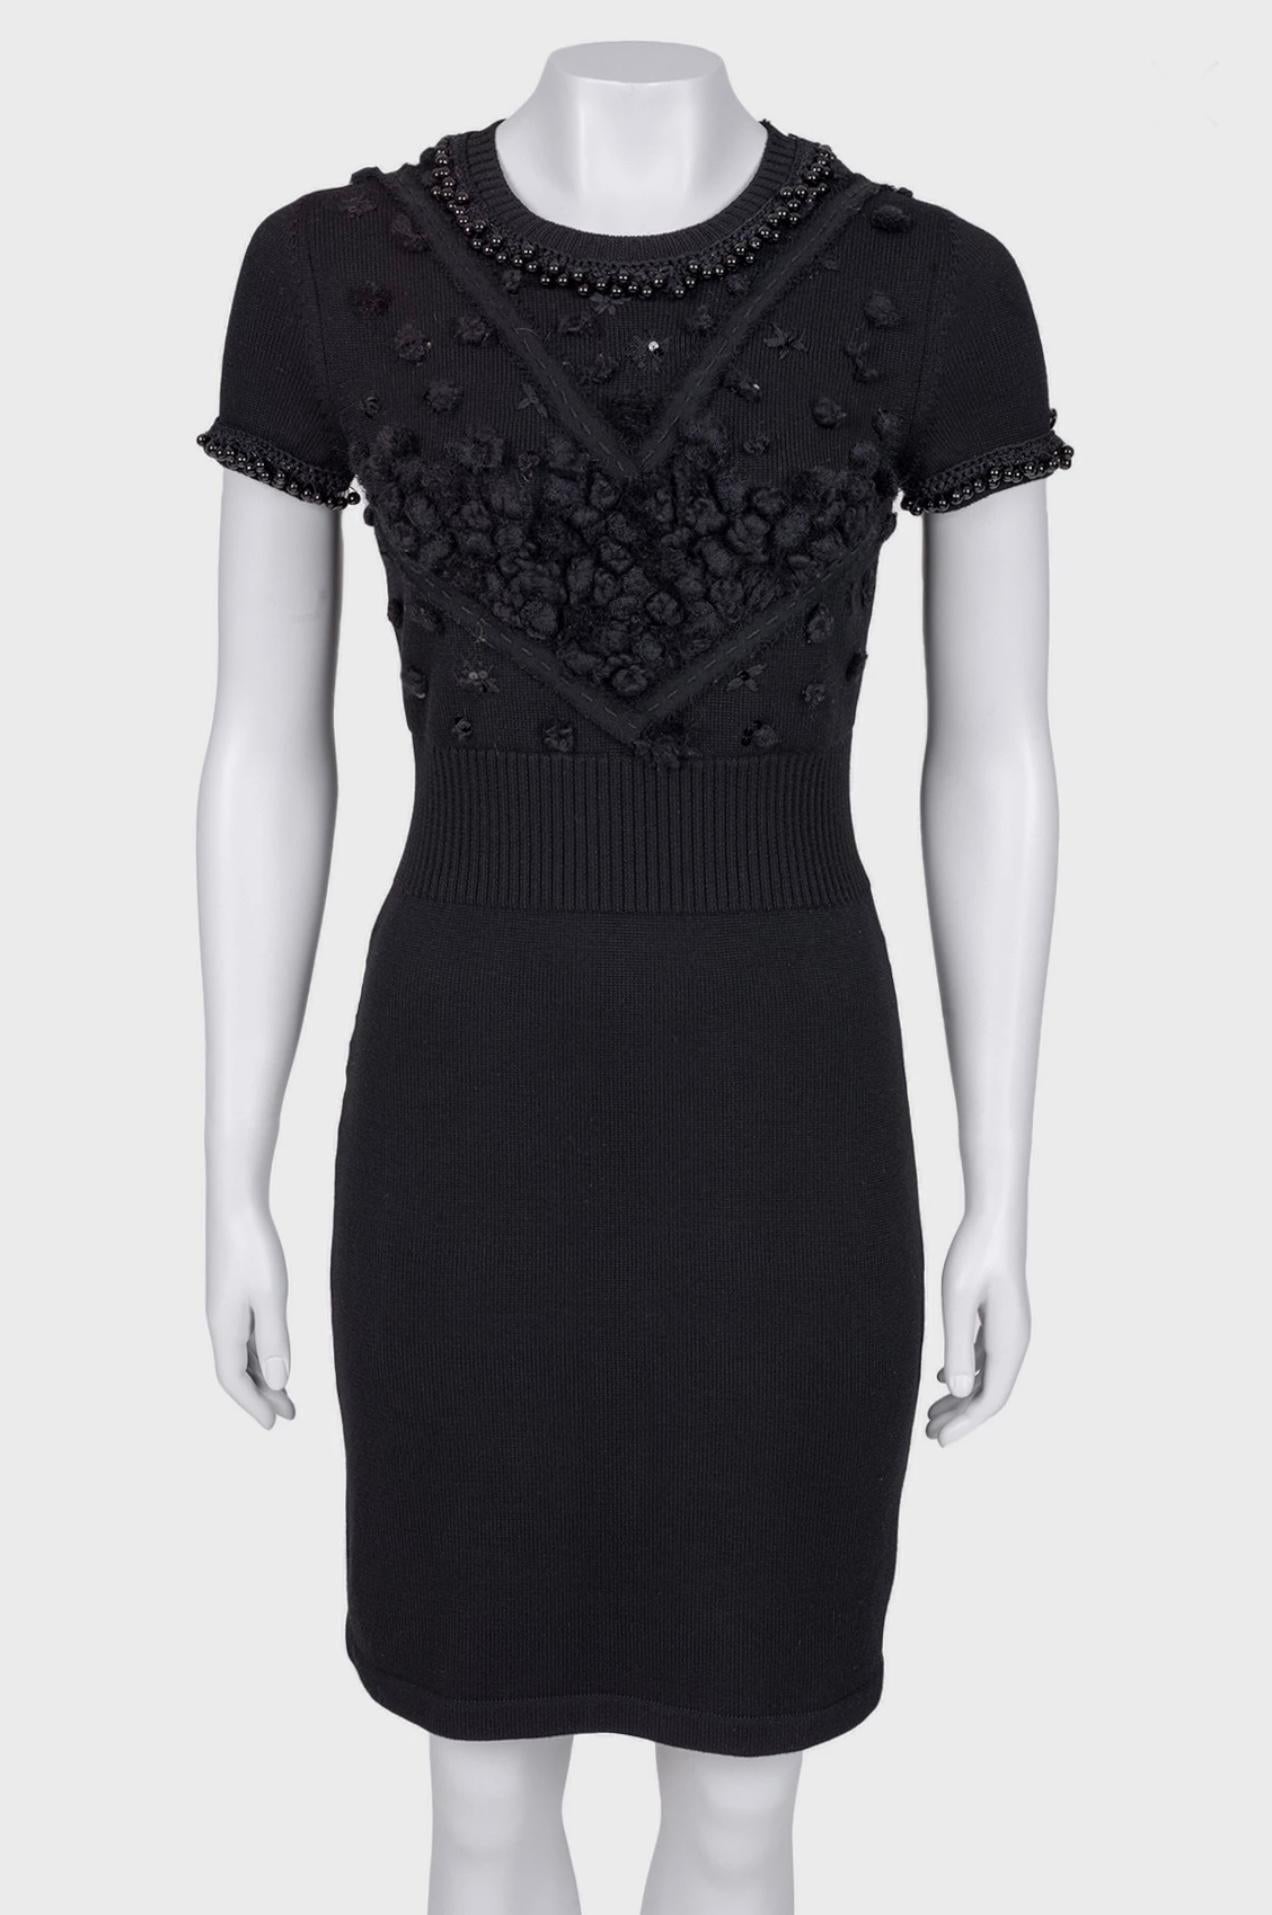 Women's or Men's Chanel Pearl Embellished Black Dress with Couture Appliques For Sale